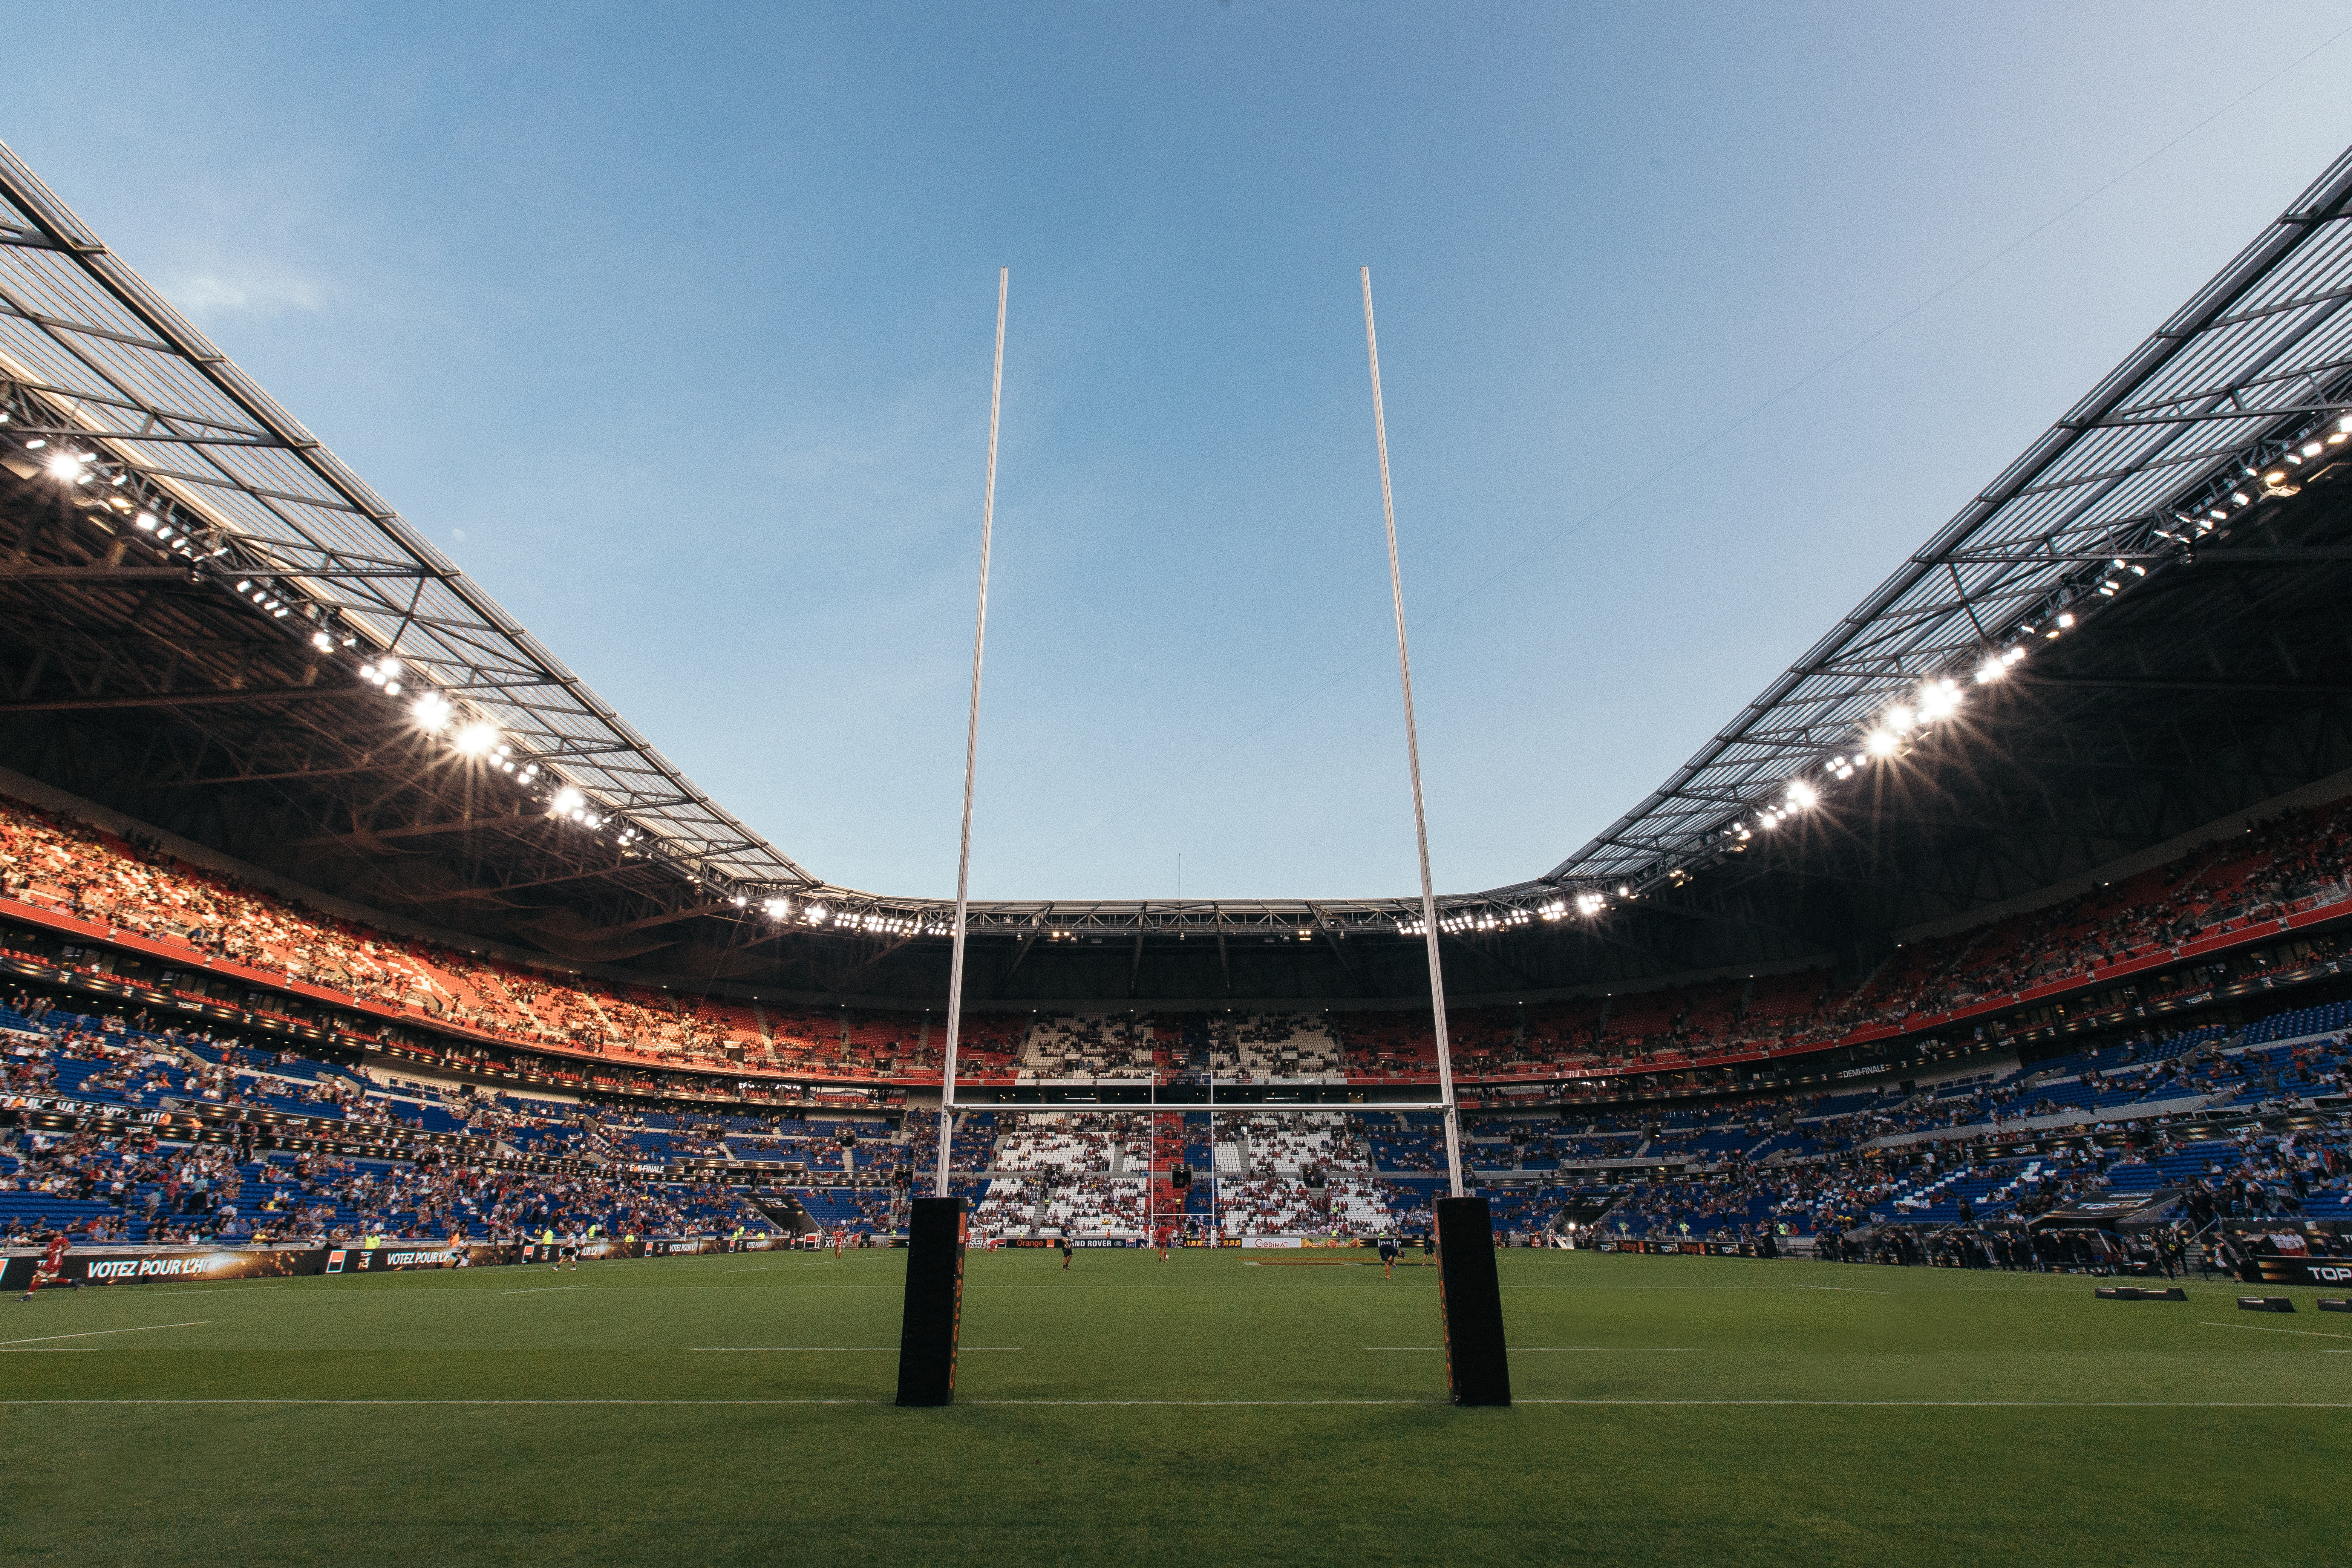 A set of rugby goal posts in a stadium